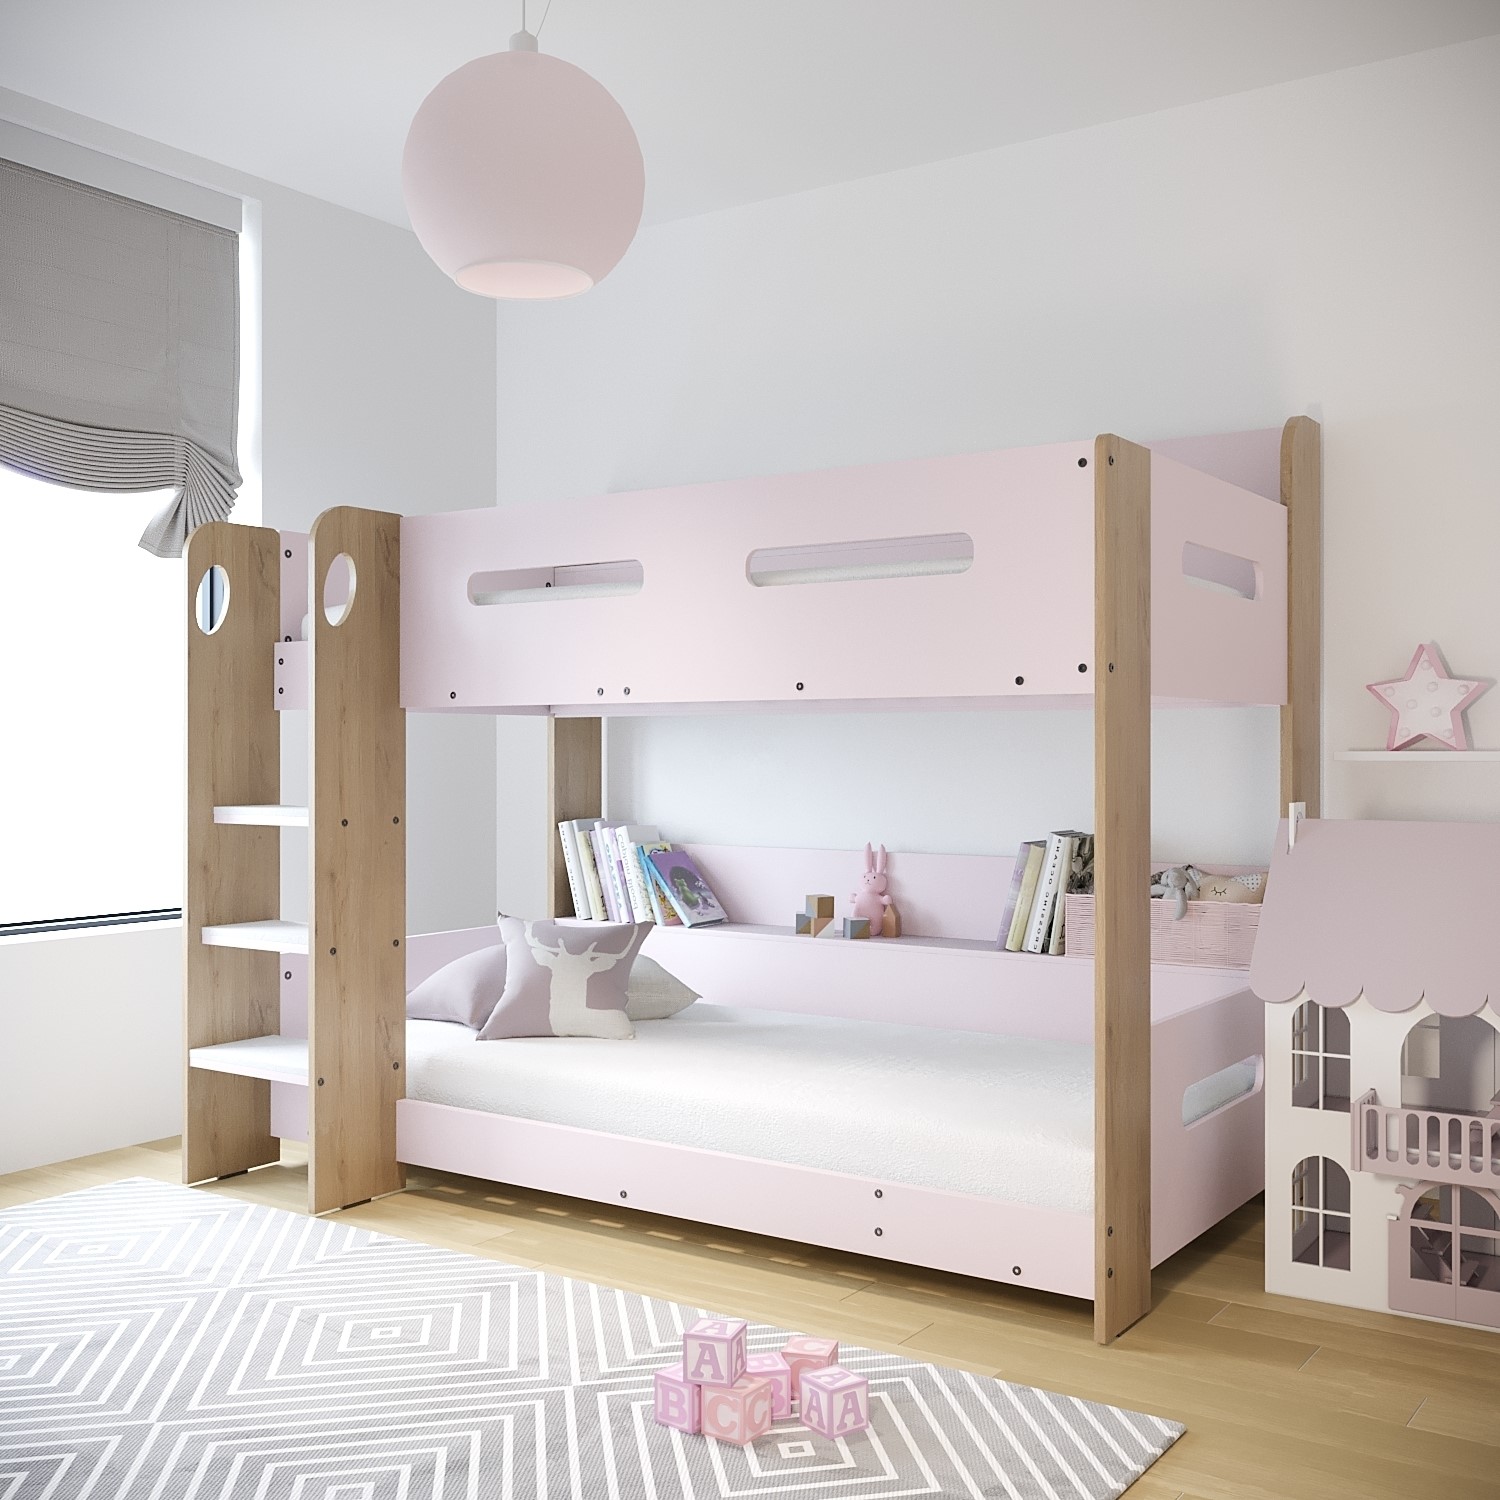 Blush Pink And Oak Wooden Bunk Bed With, Wooden Bunk Beds With Shelves